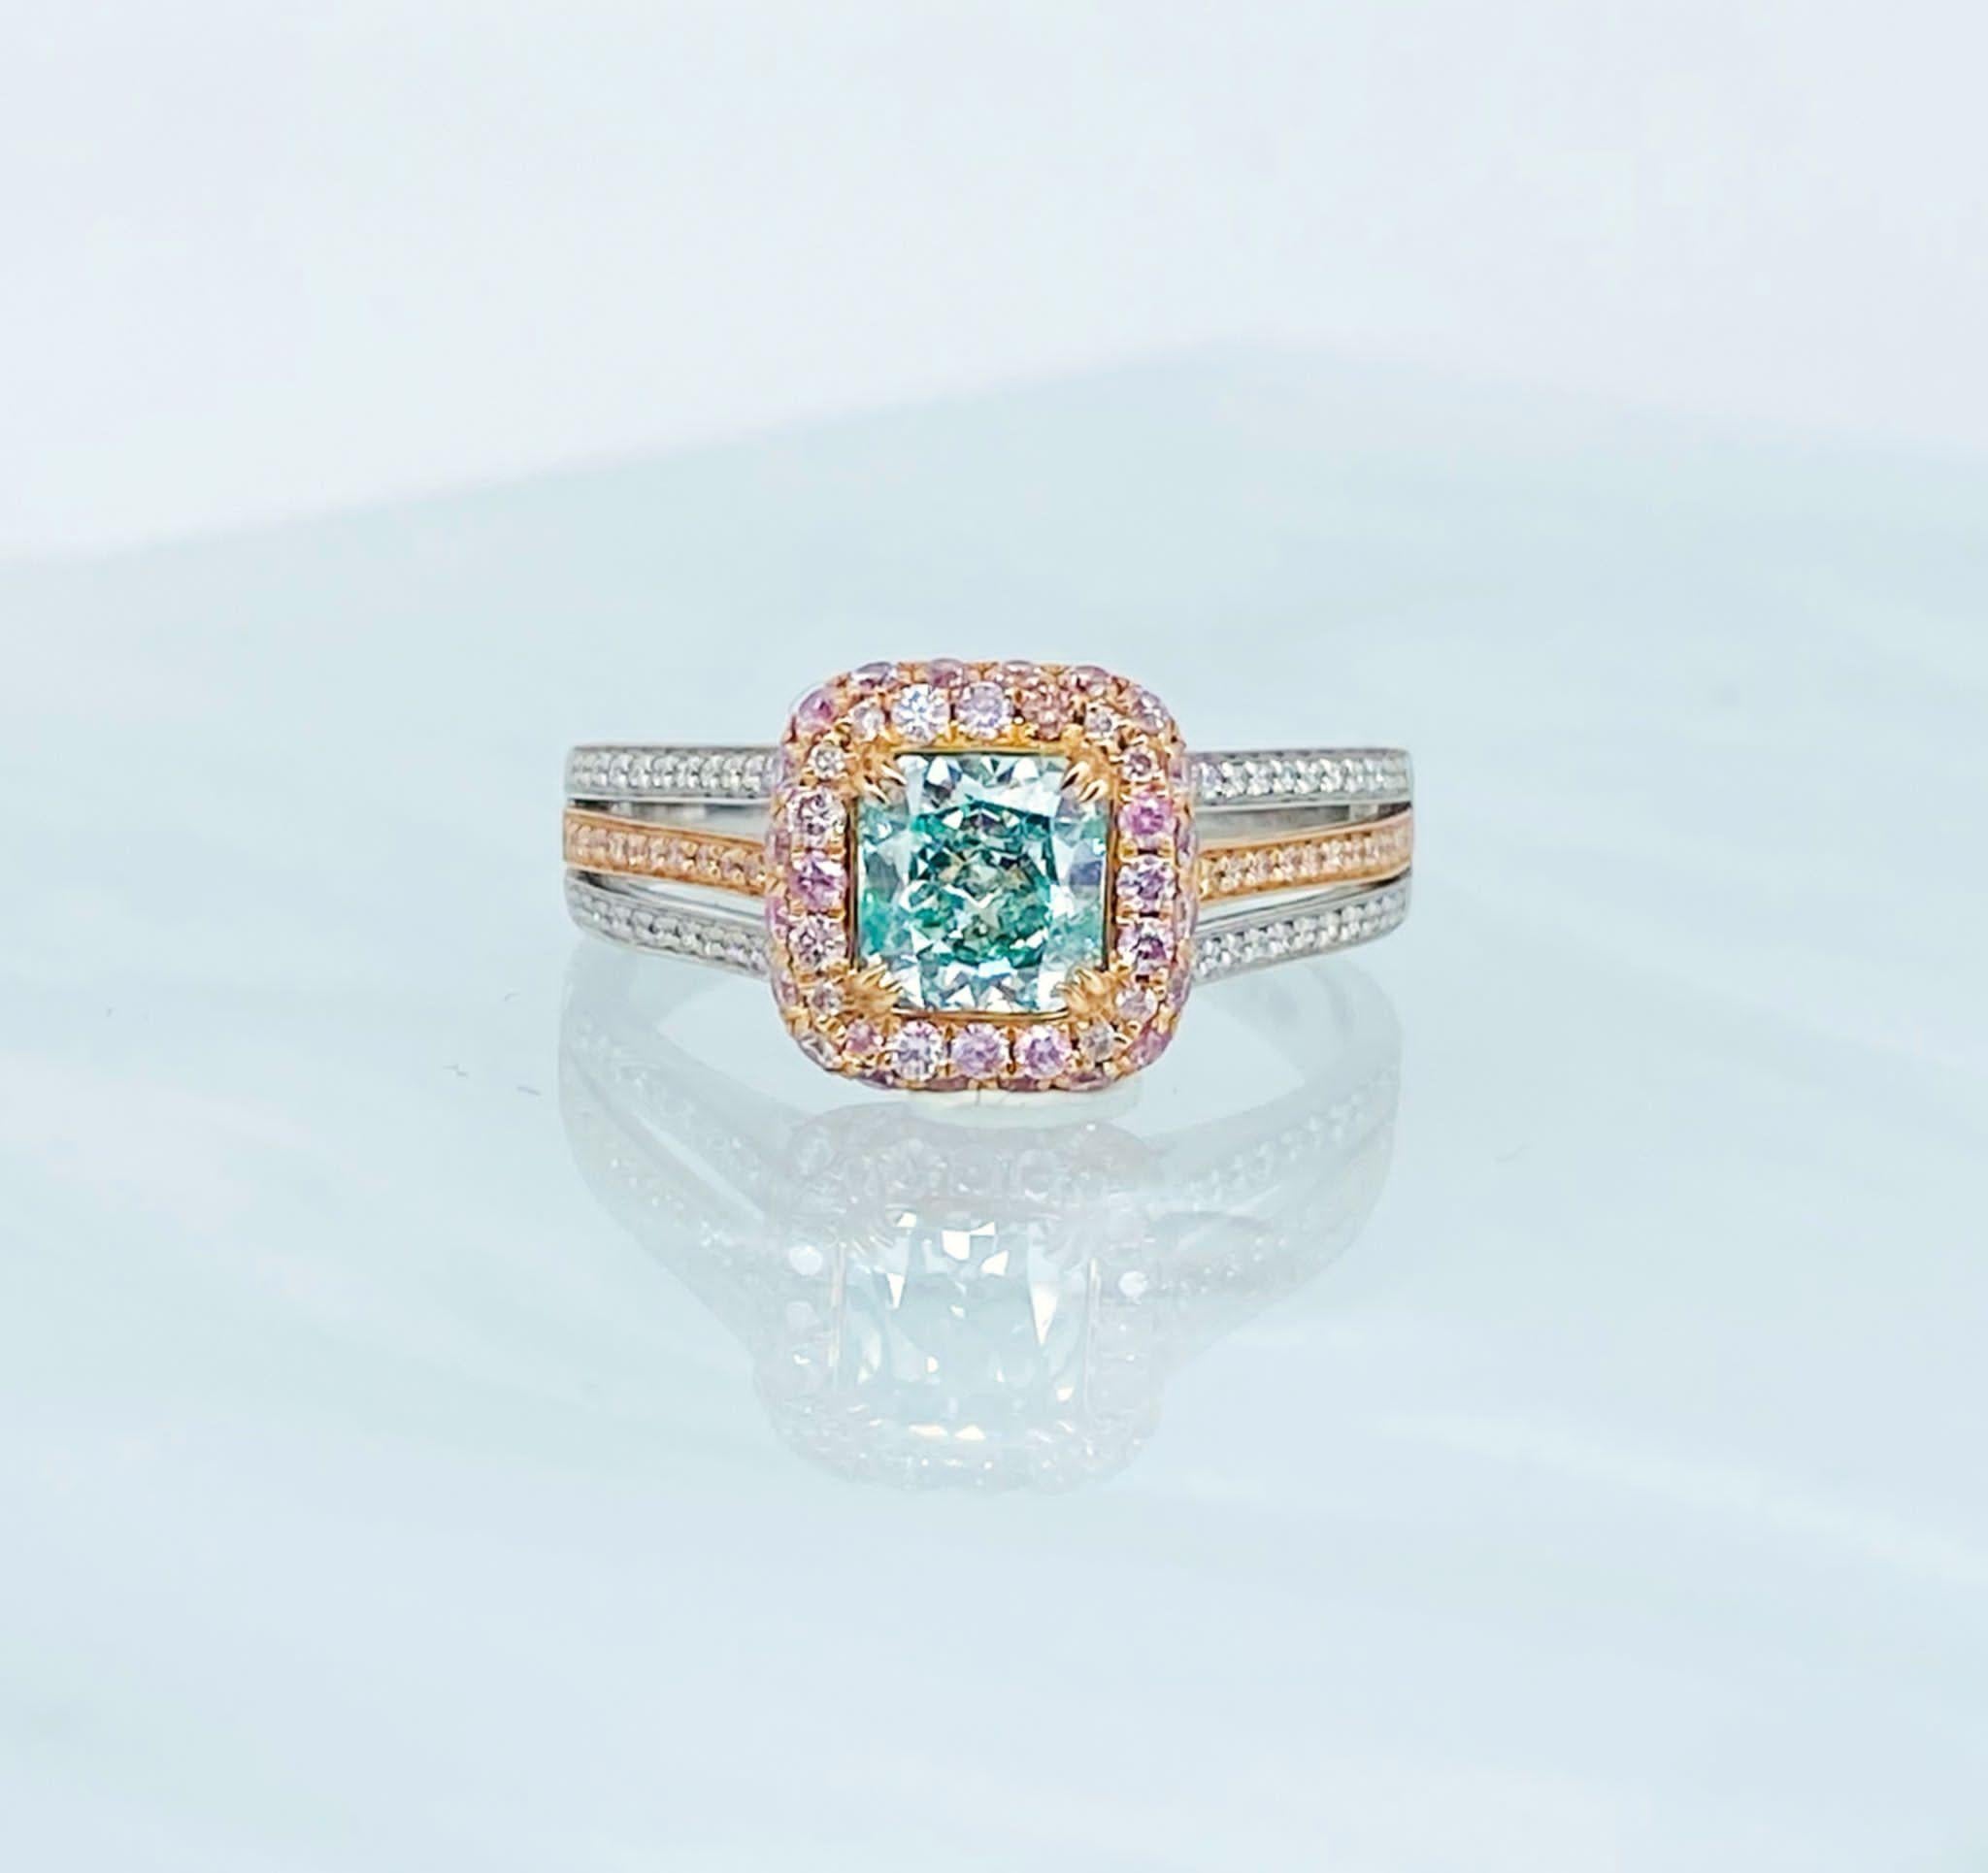 **100% NATURAL FANCY COLOUR DIAMOND JEWELLERY**

✪ Jewelry Details ✪

♦ MAIN STONE DETAILS

➛ Stone Shape: Radiant
➛ Stone Color: Fancy Light Green
➛ Stone Weight: 0.83 carat
➛ Clarity: VS1
➛ GIA certified

♦ SIDE STONE DETAILS

➛ Side Pink Diamonds